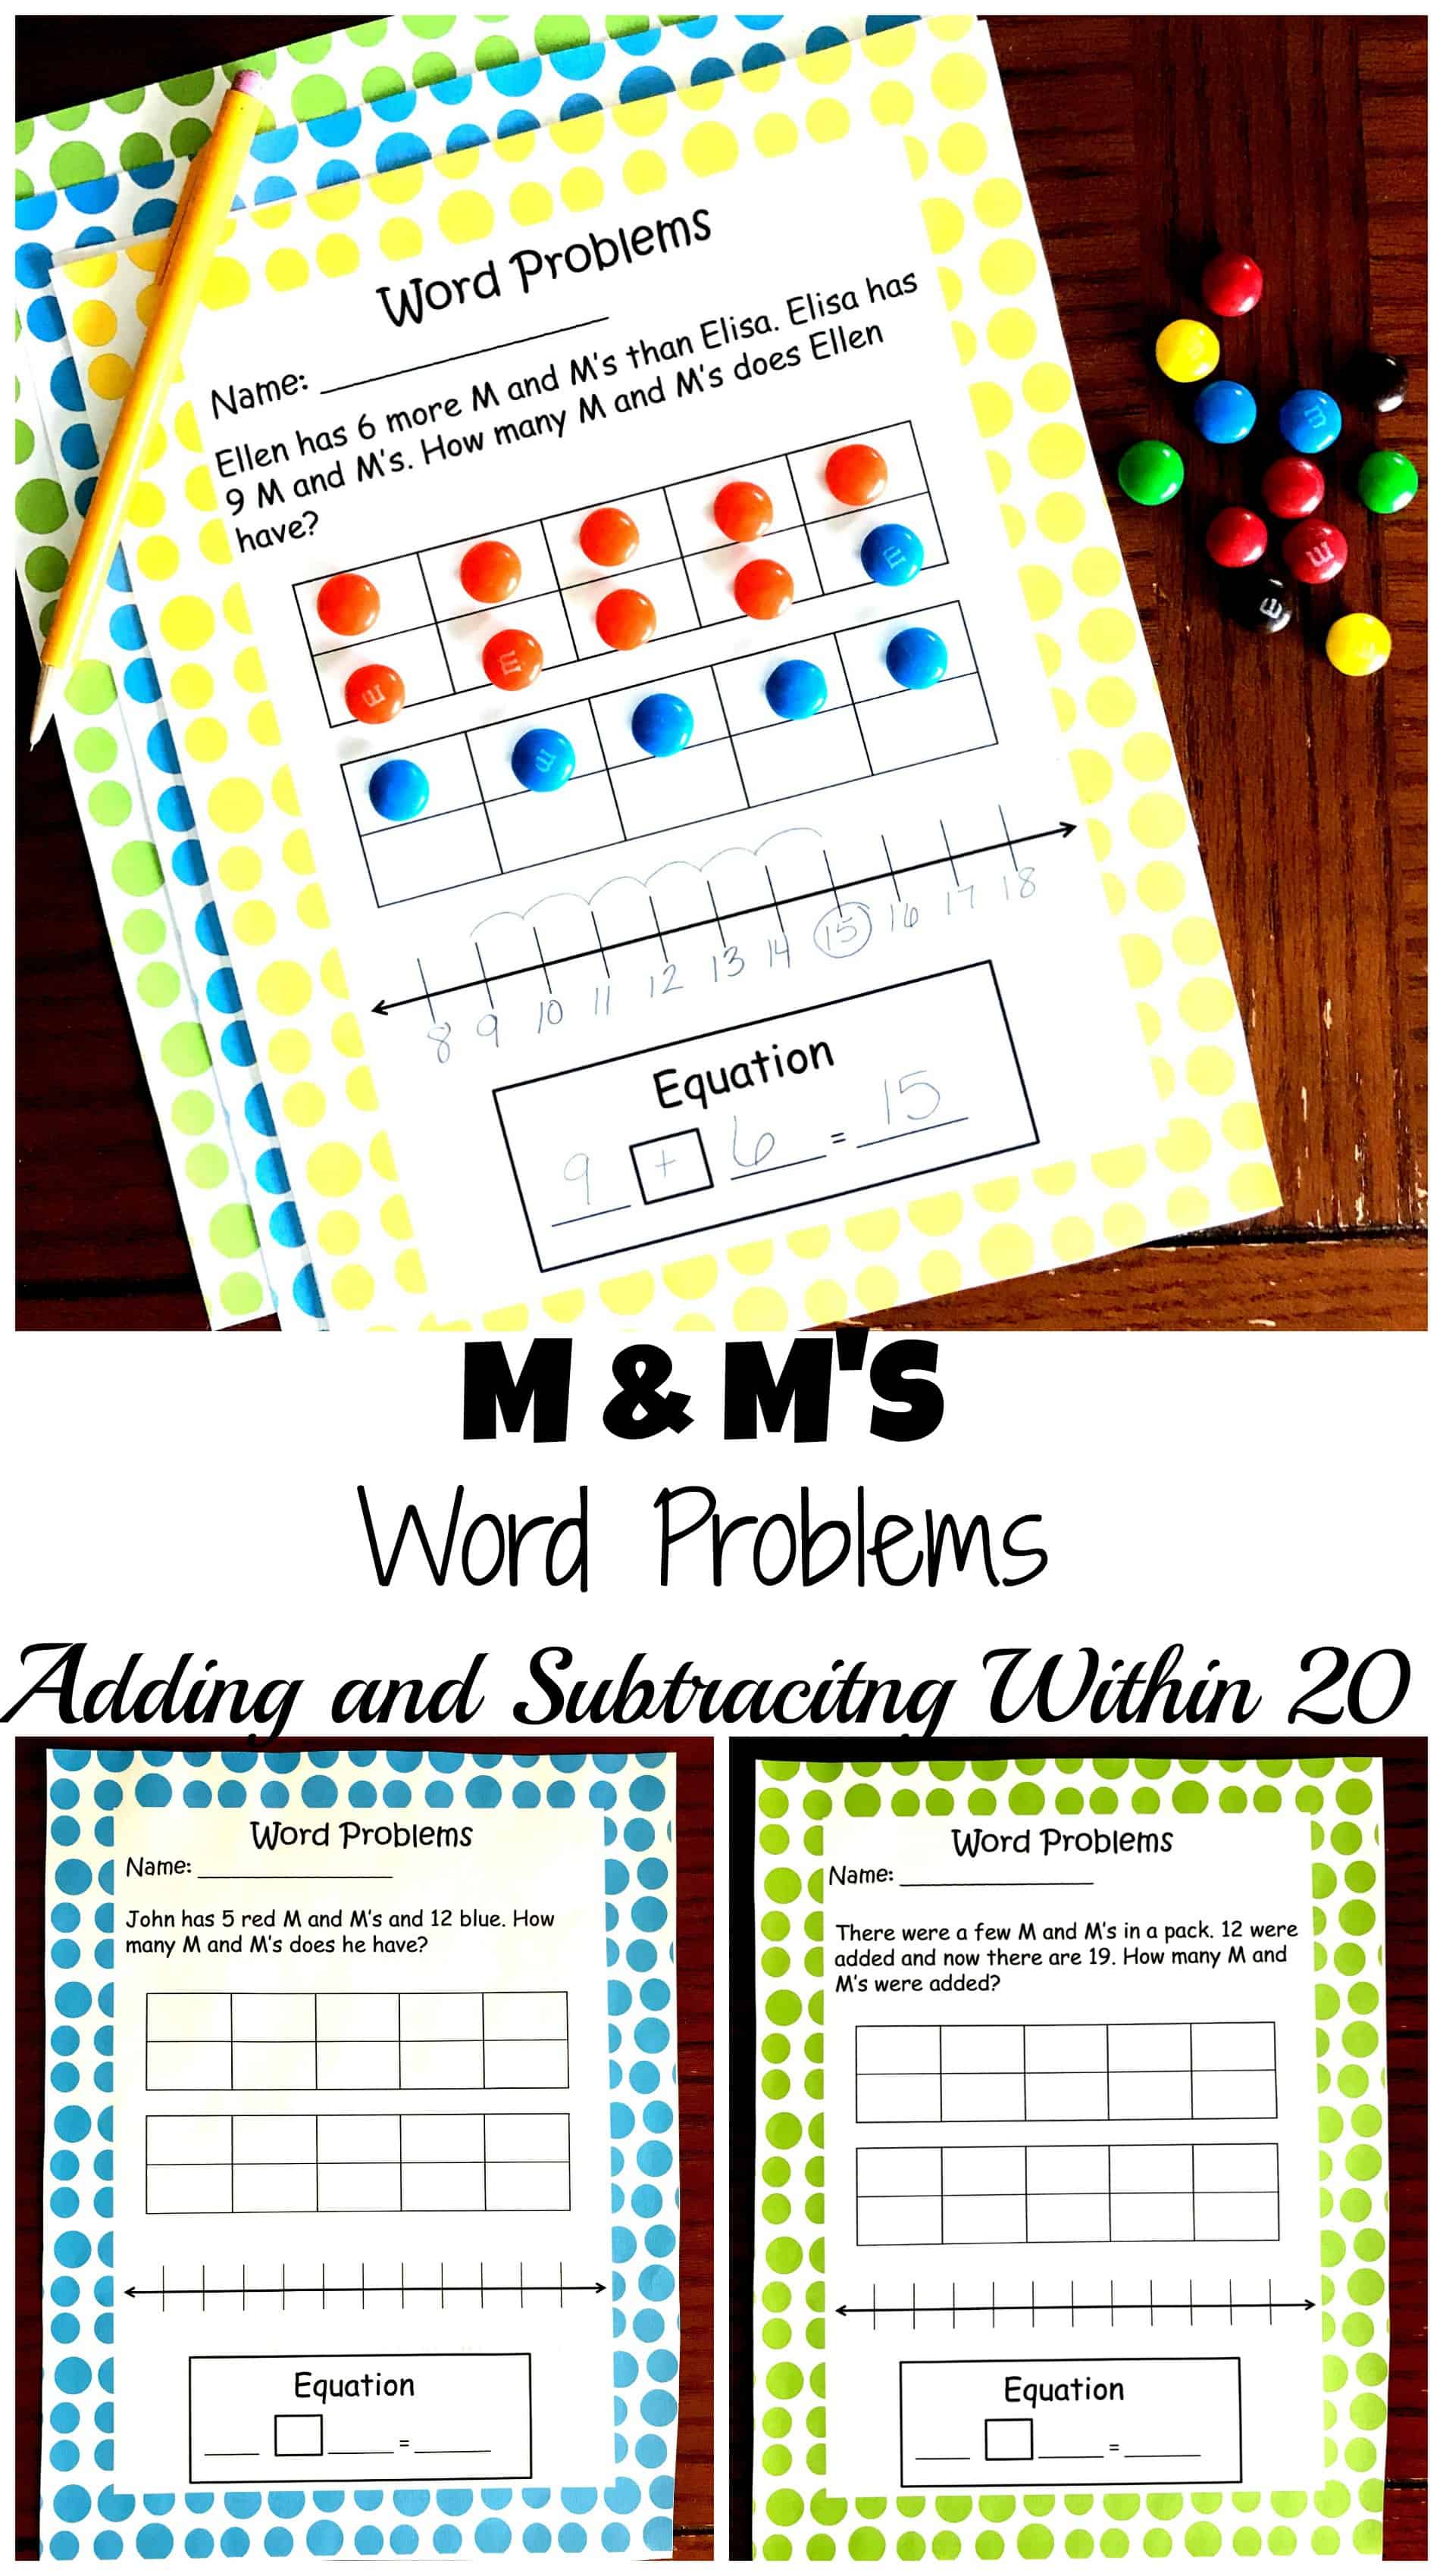 5 Free M & M Word Problems to Practice Adding and Subtracting Within 20